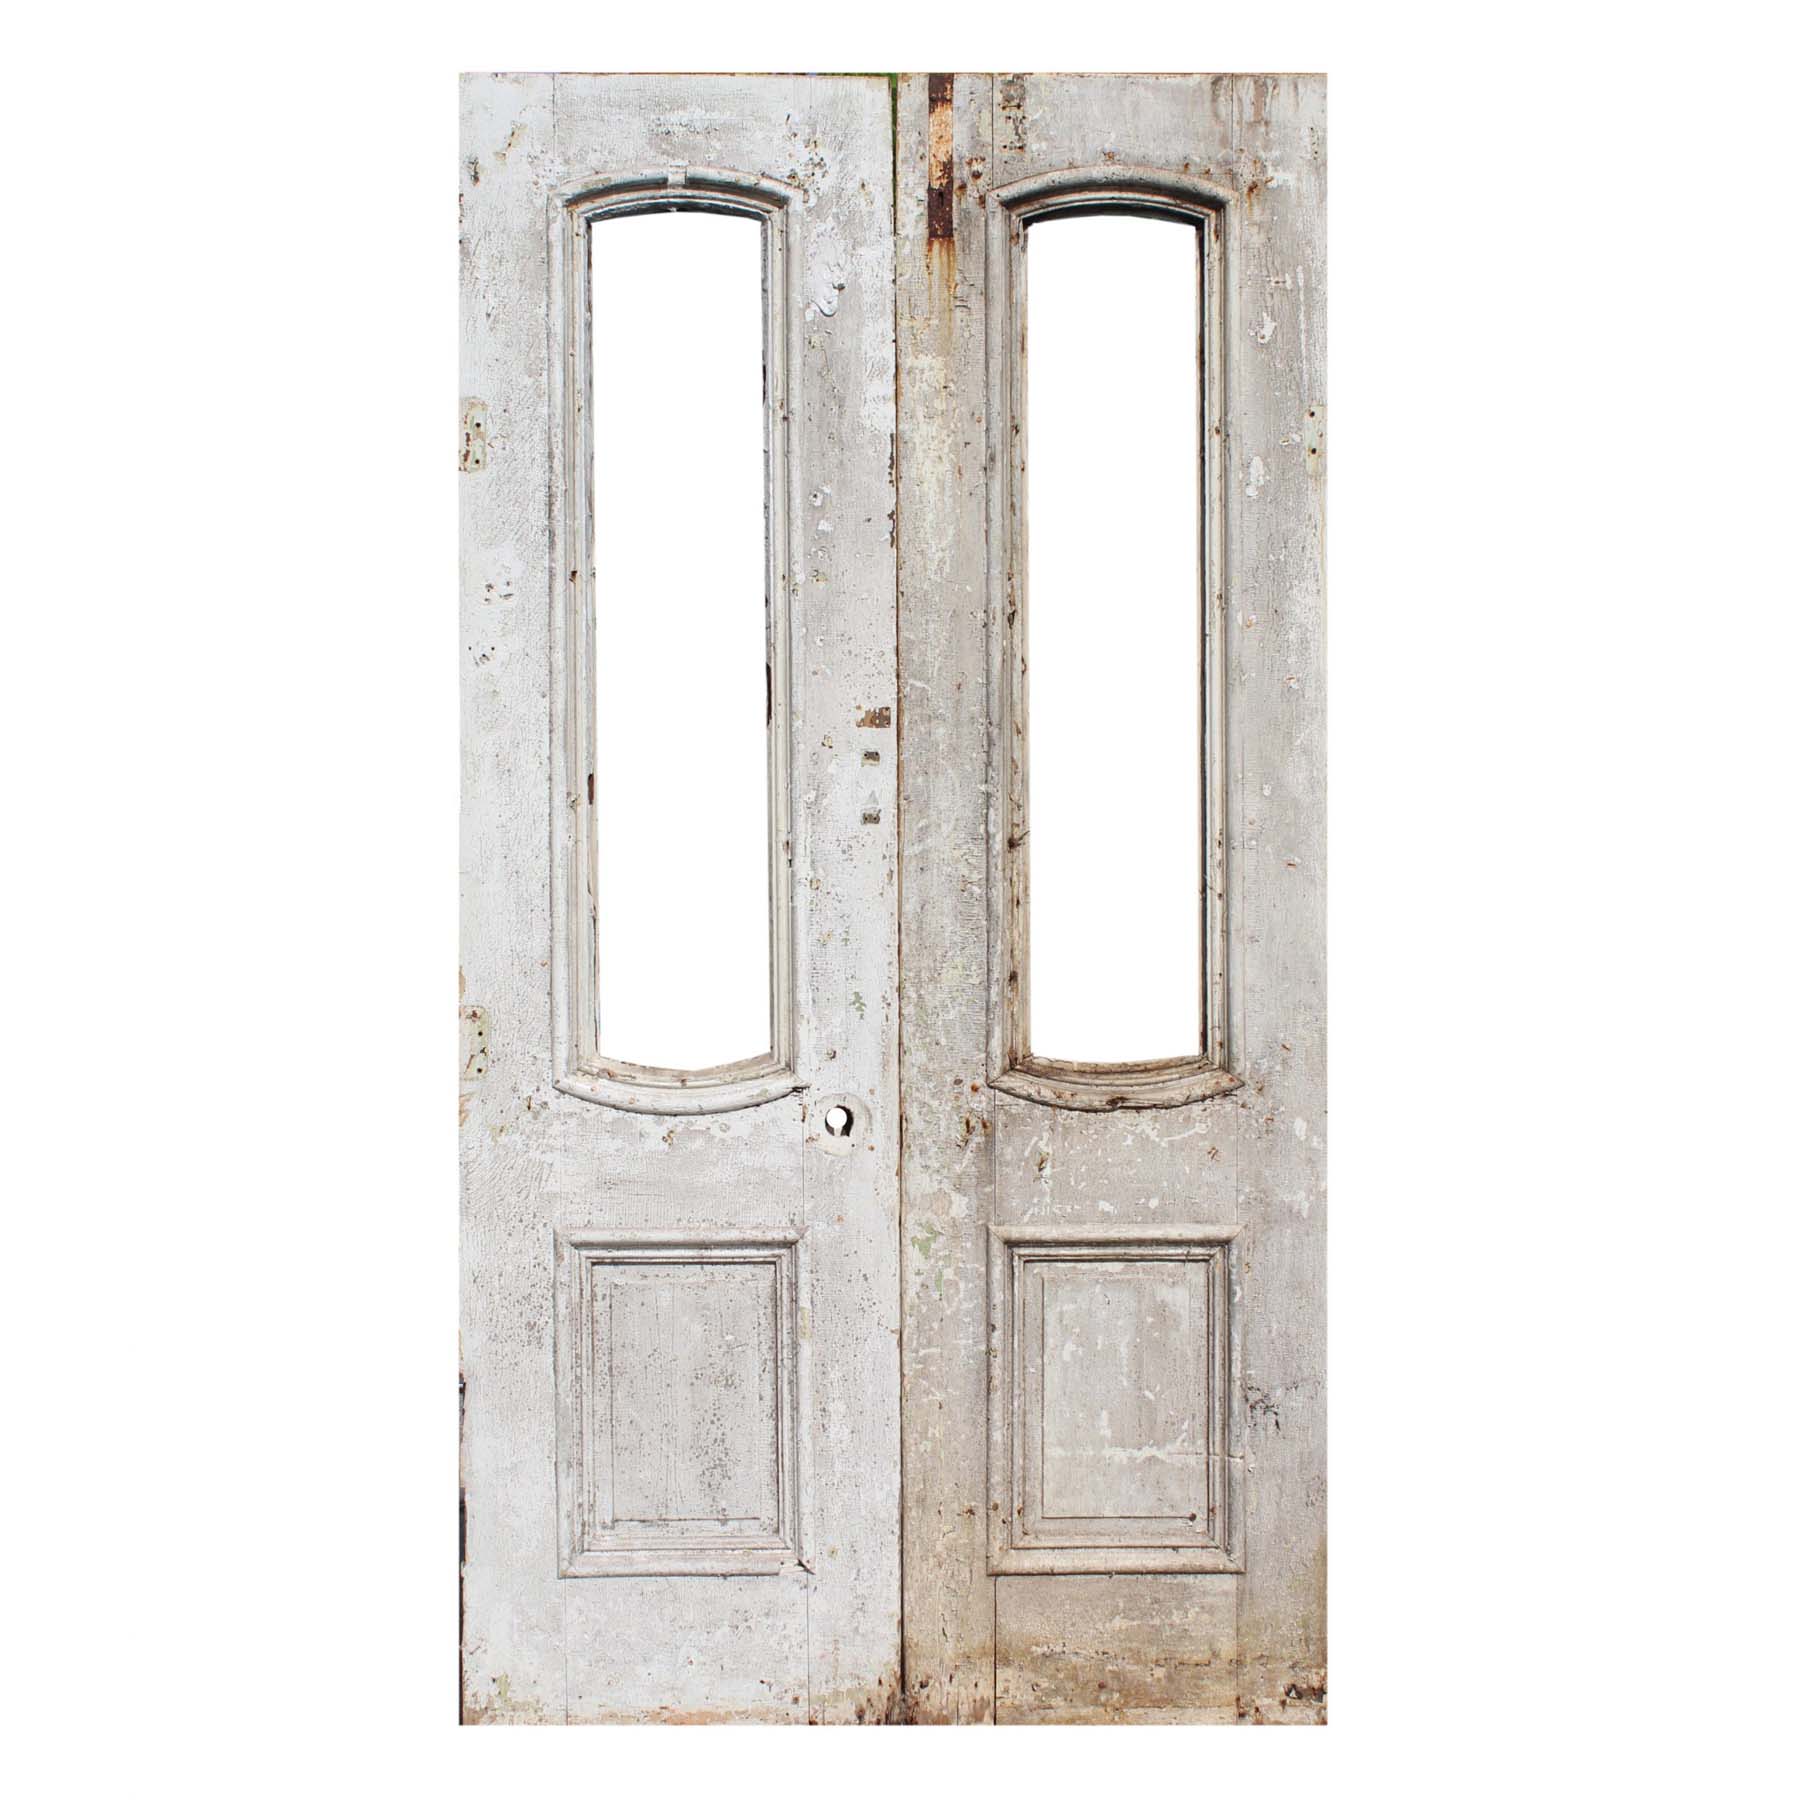 SOLD Reclaimed 48" Double Doors with Arched Windows, Late 19th Century-68014